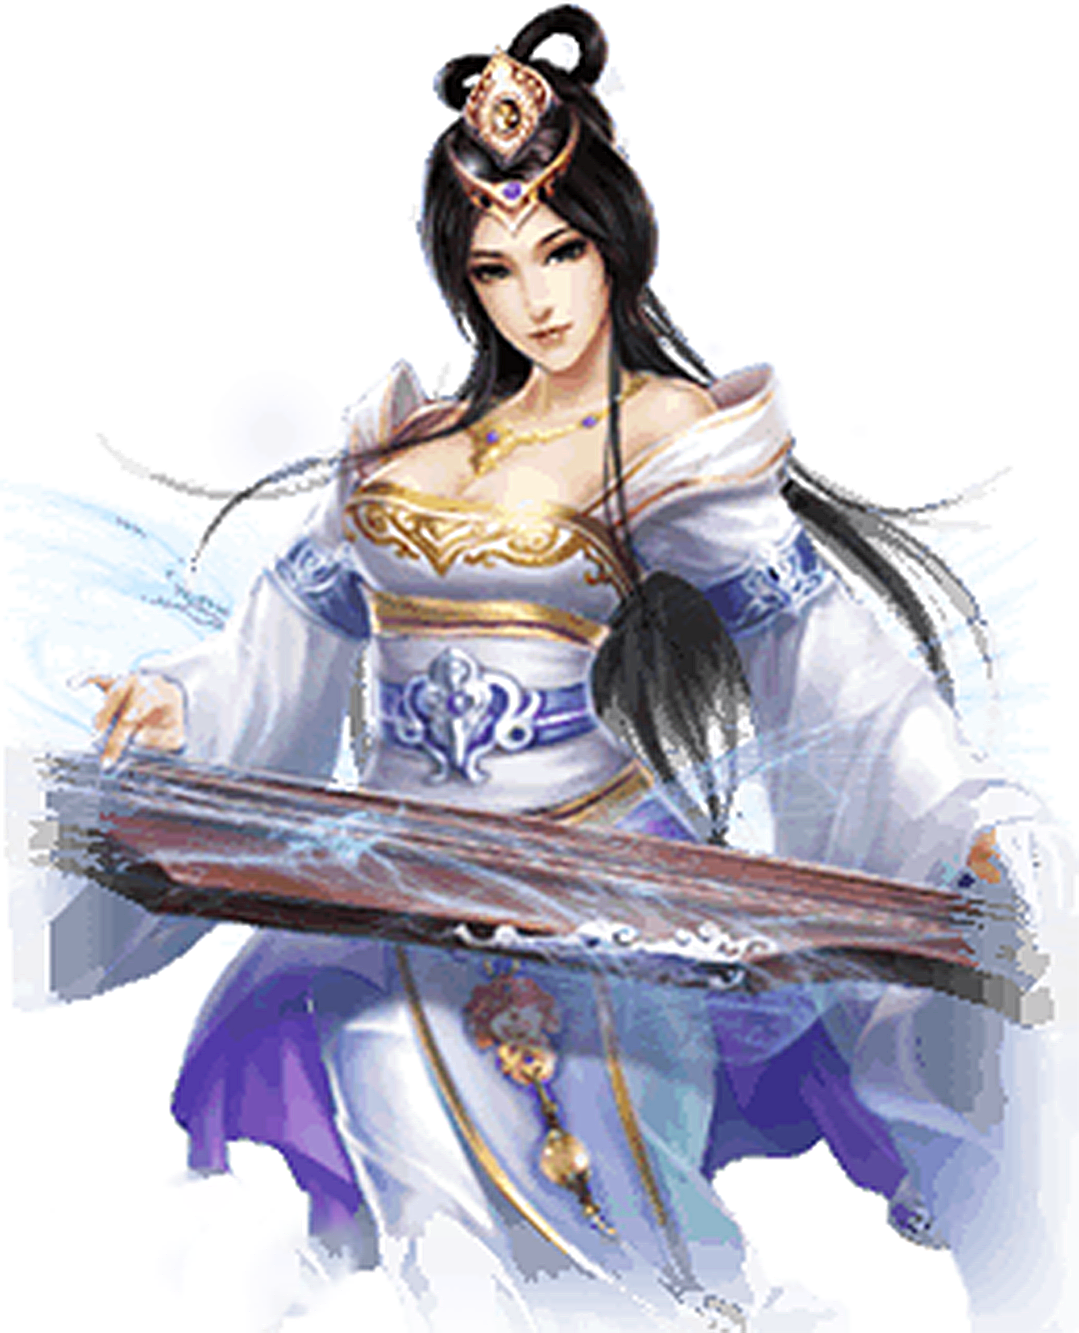 Ni Hao, Li Huan Ying download the new for android